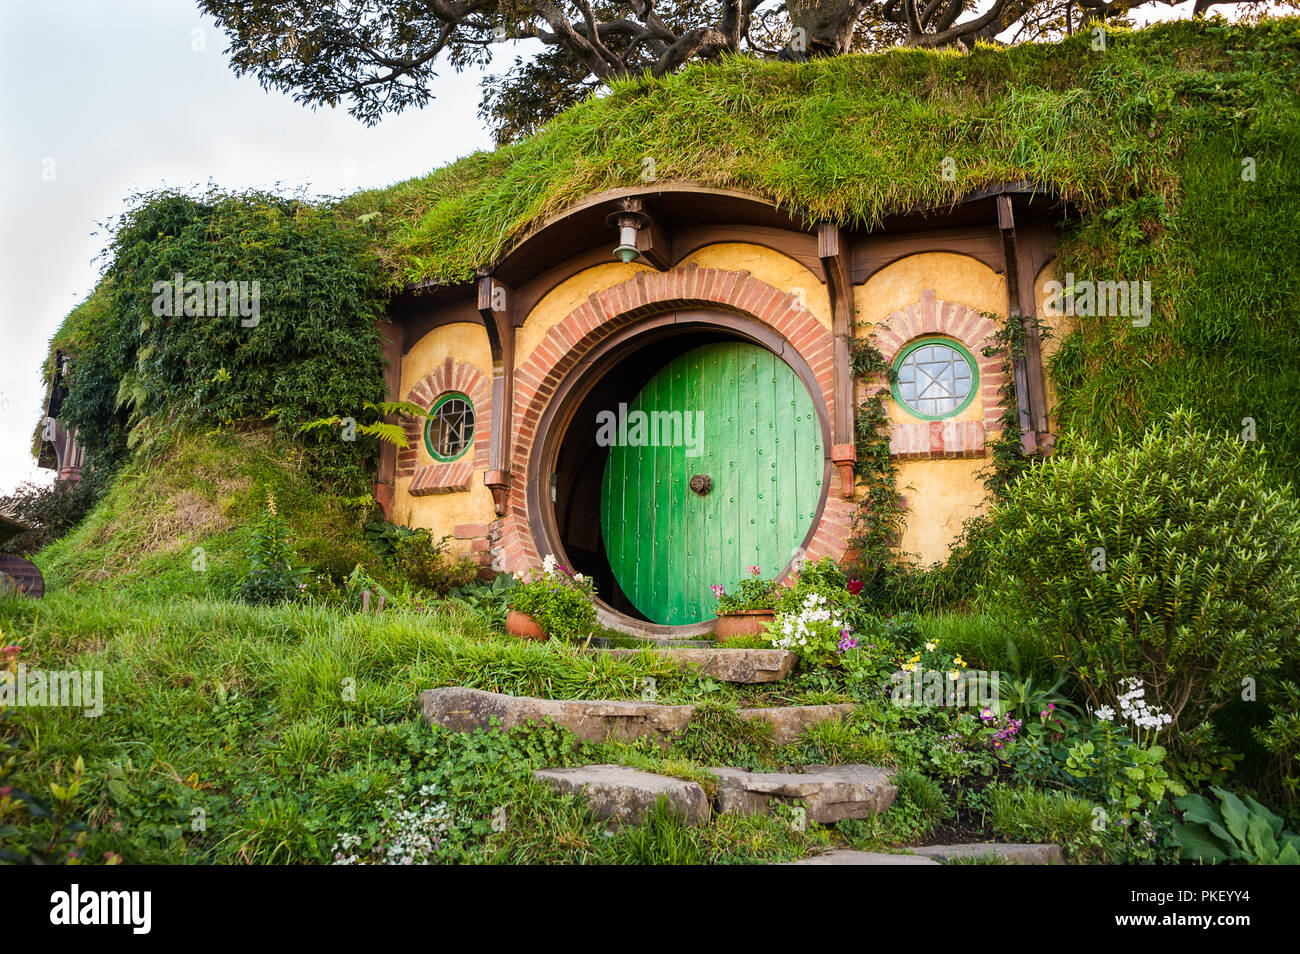 Hobbiton movie set created to film Lord of the Rings and The Hobbit. Stock Photo